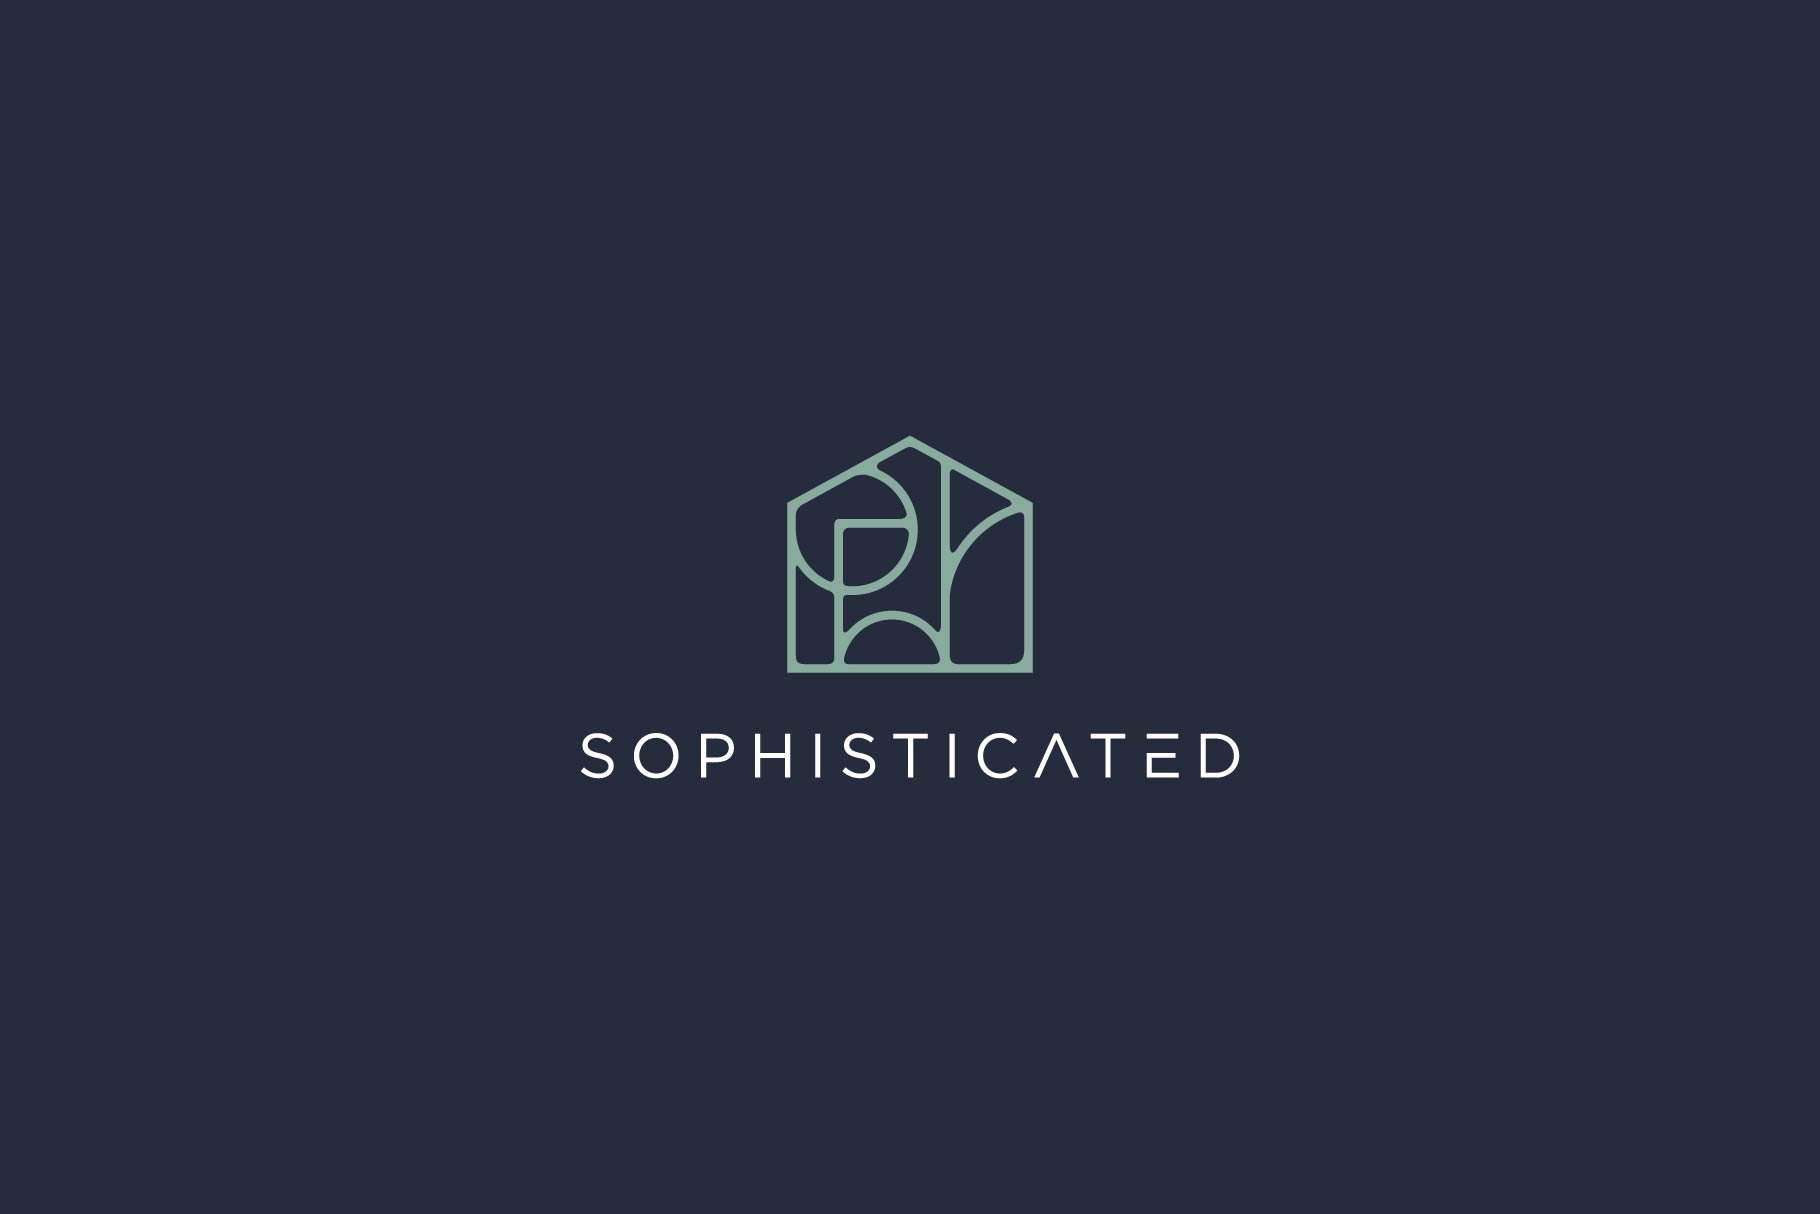 Dark blue background with thin turquoise real estate logo.